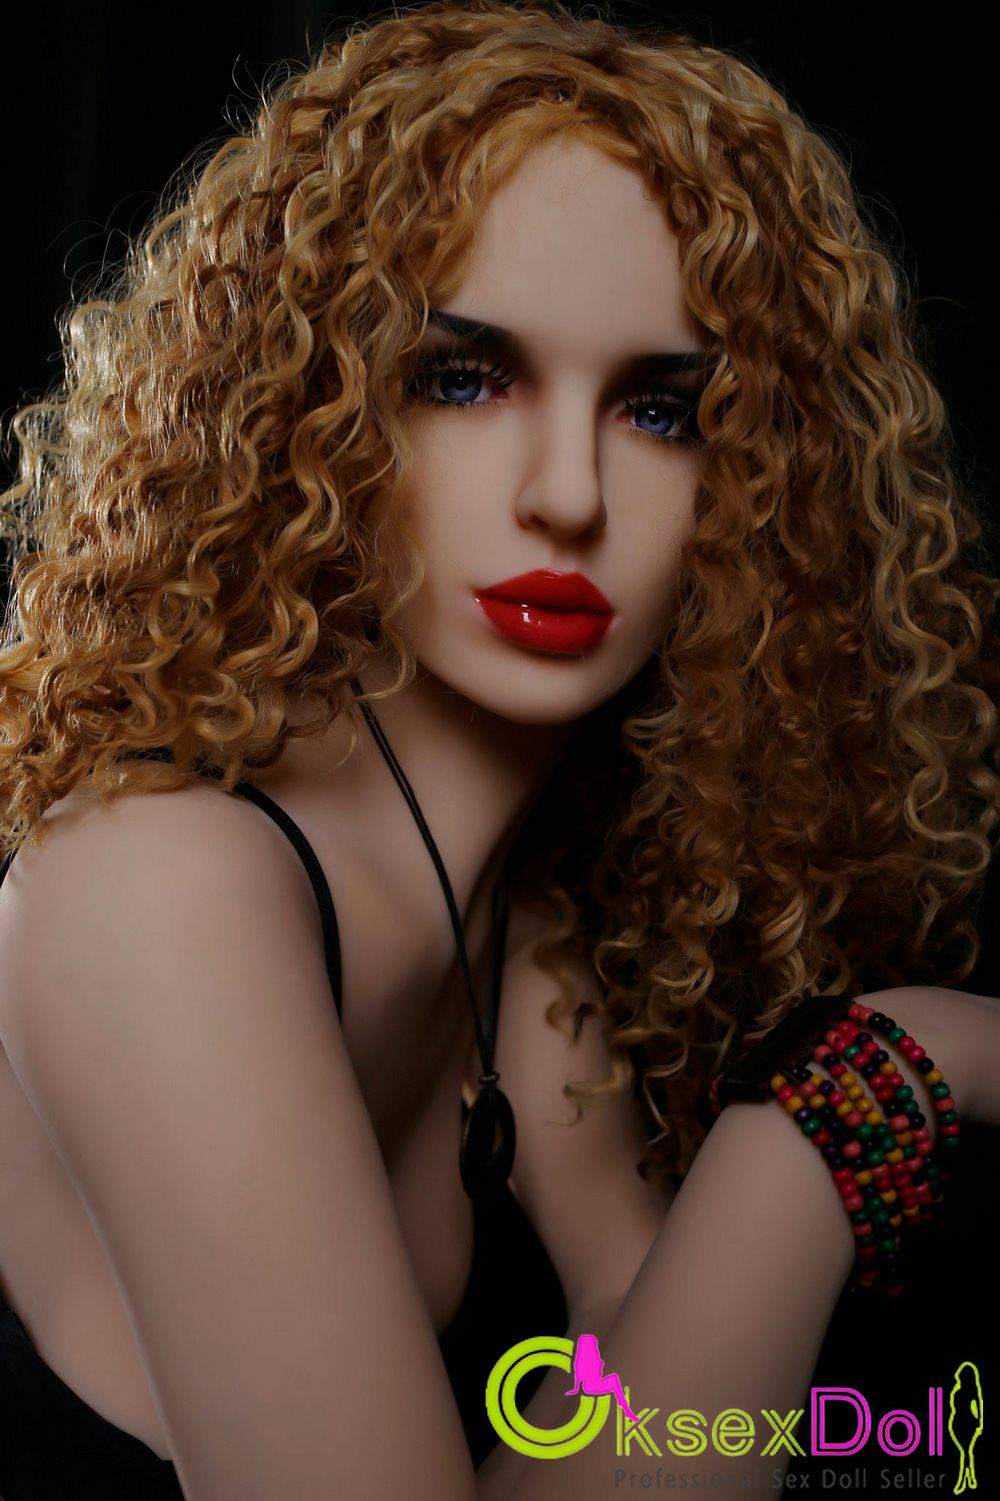 Blonde Curly Hair sex dolls images